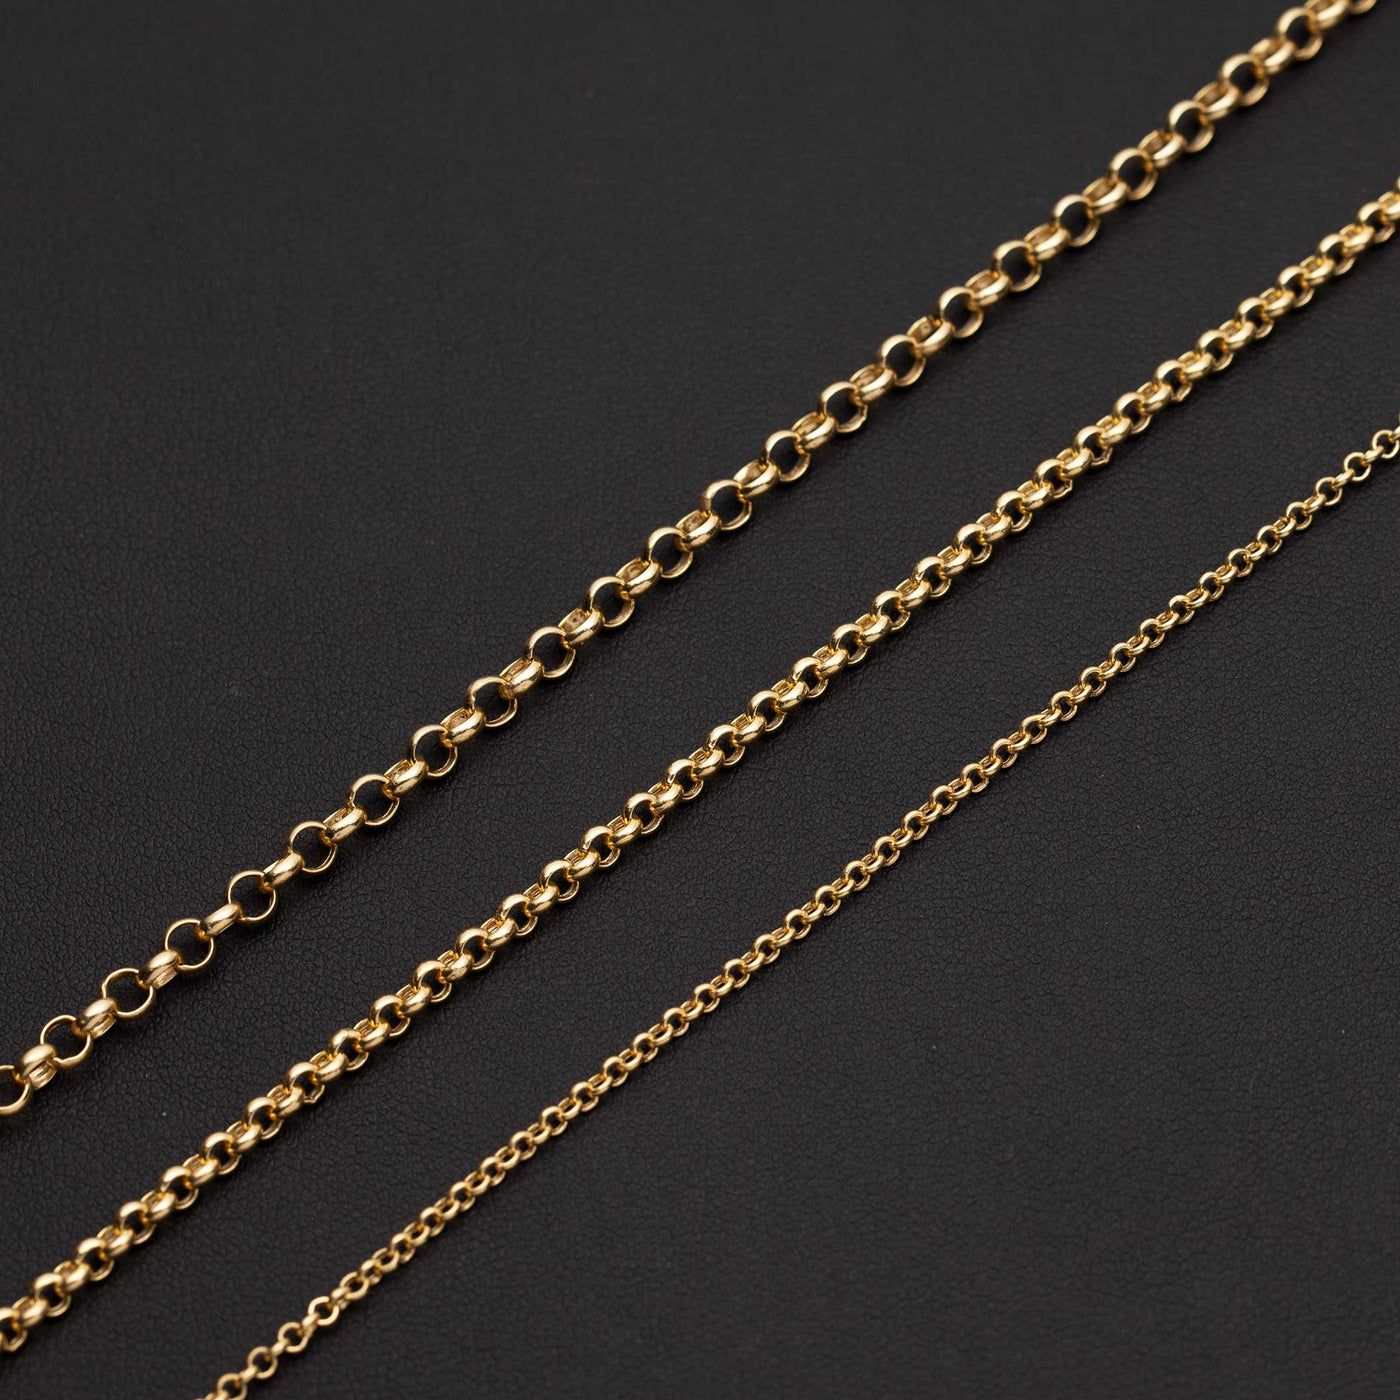 Women's Round Rolo Link Chain Necklace 10K Yellow Gold - Hollow